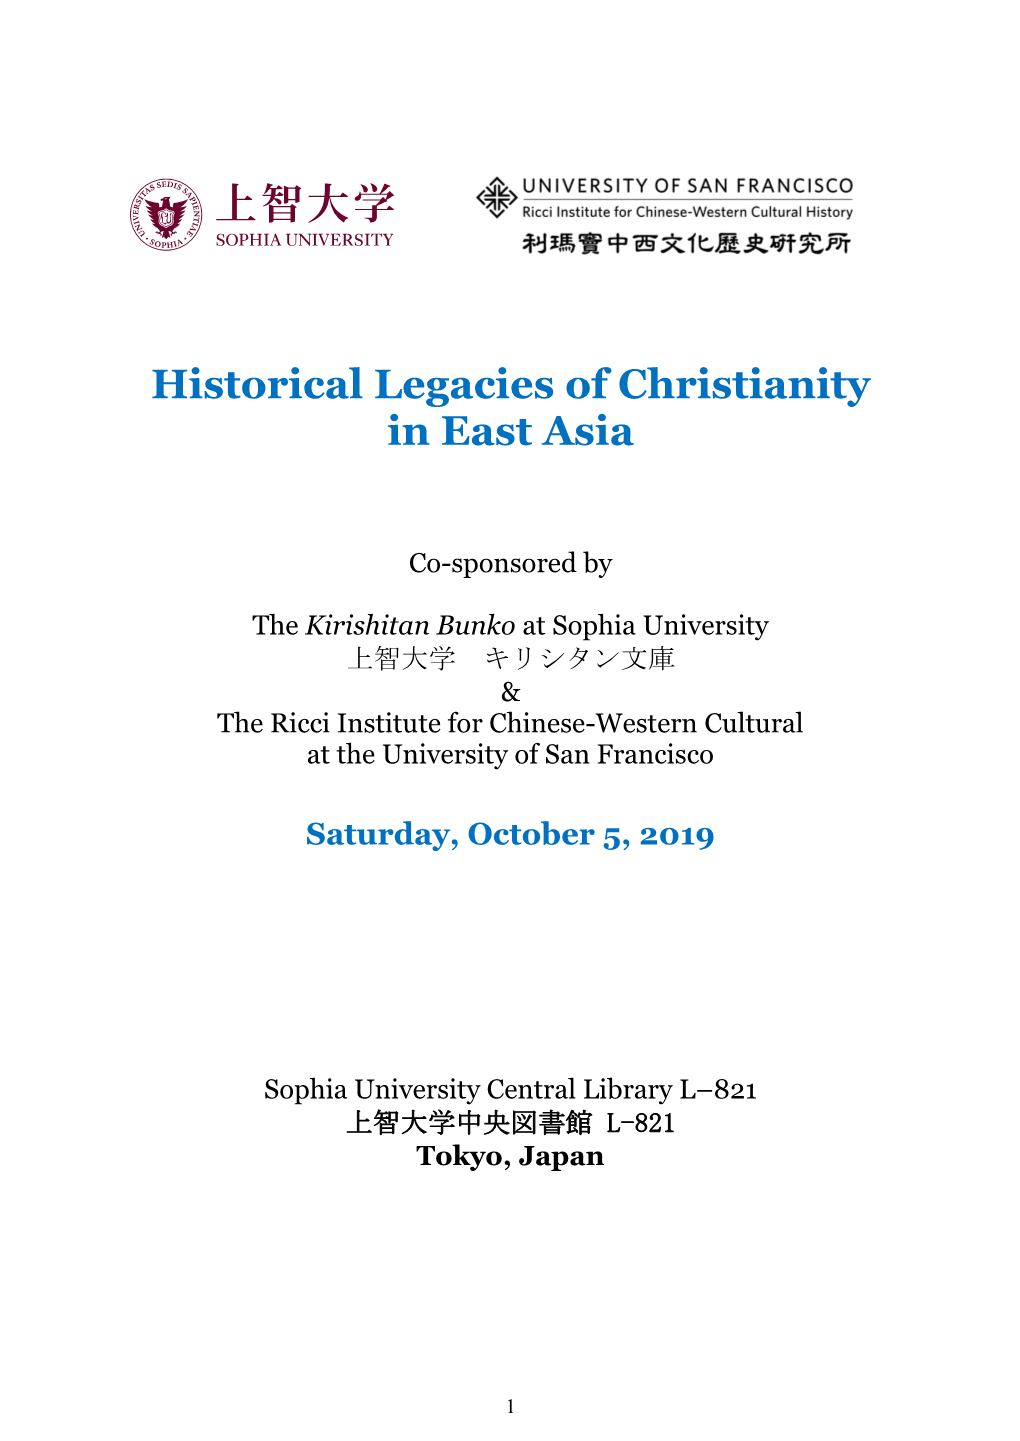 Historical Legacies of Christianity in East Asia